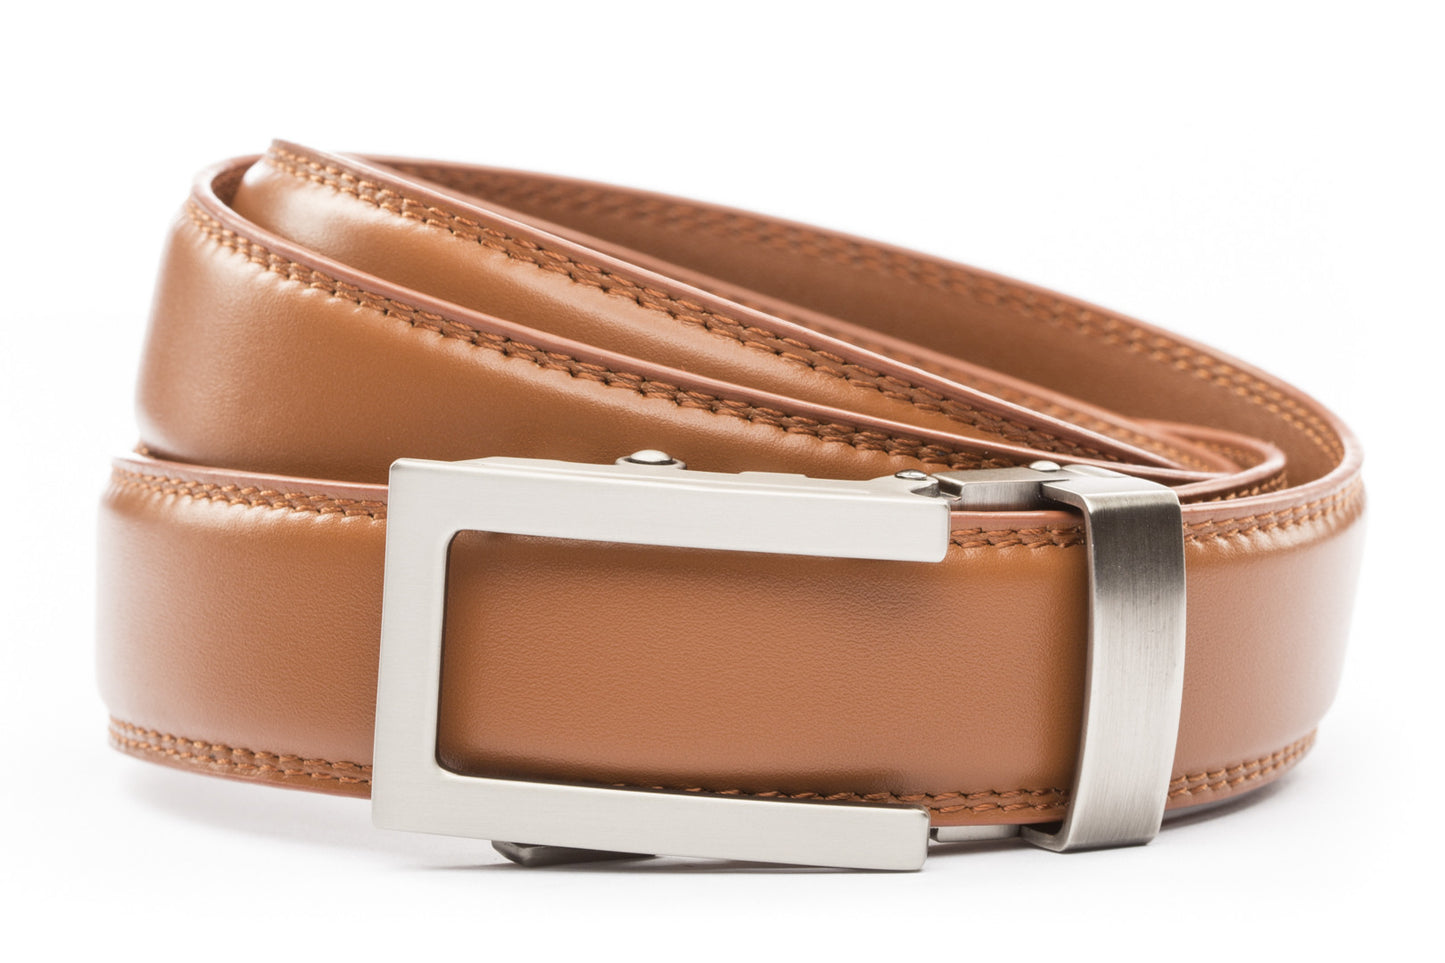 Saddle Tan Formal Leather w/Traditional in Gunmetal Buckle (1.25") - Anson Belt & Buckle